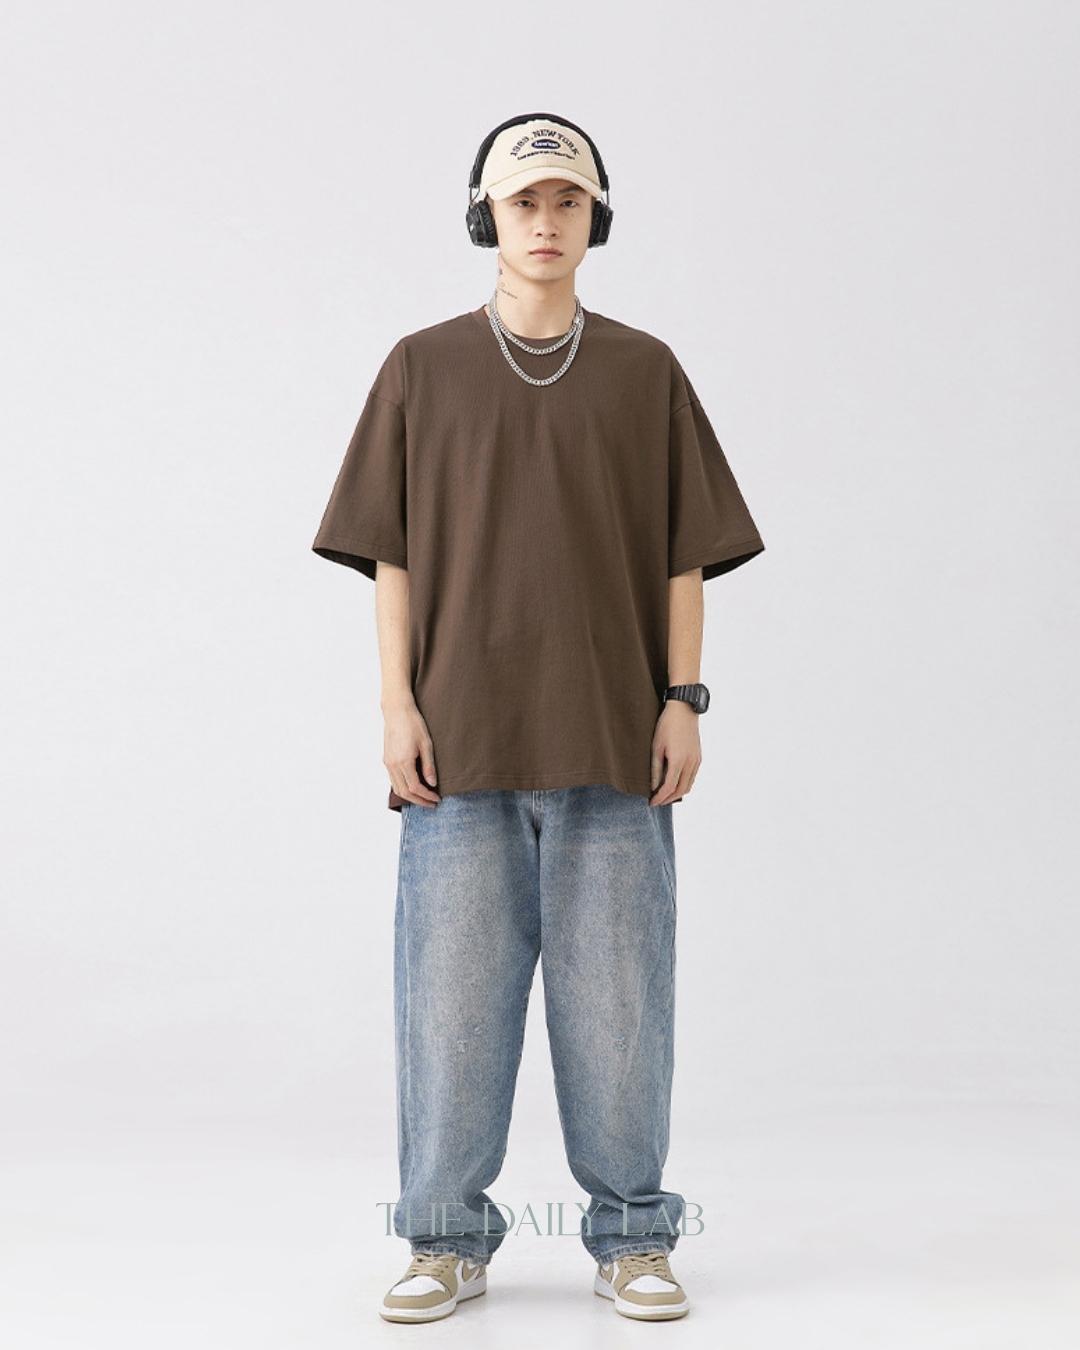 200G Cotton Oversized Tee in Brown